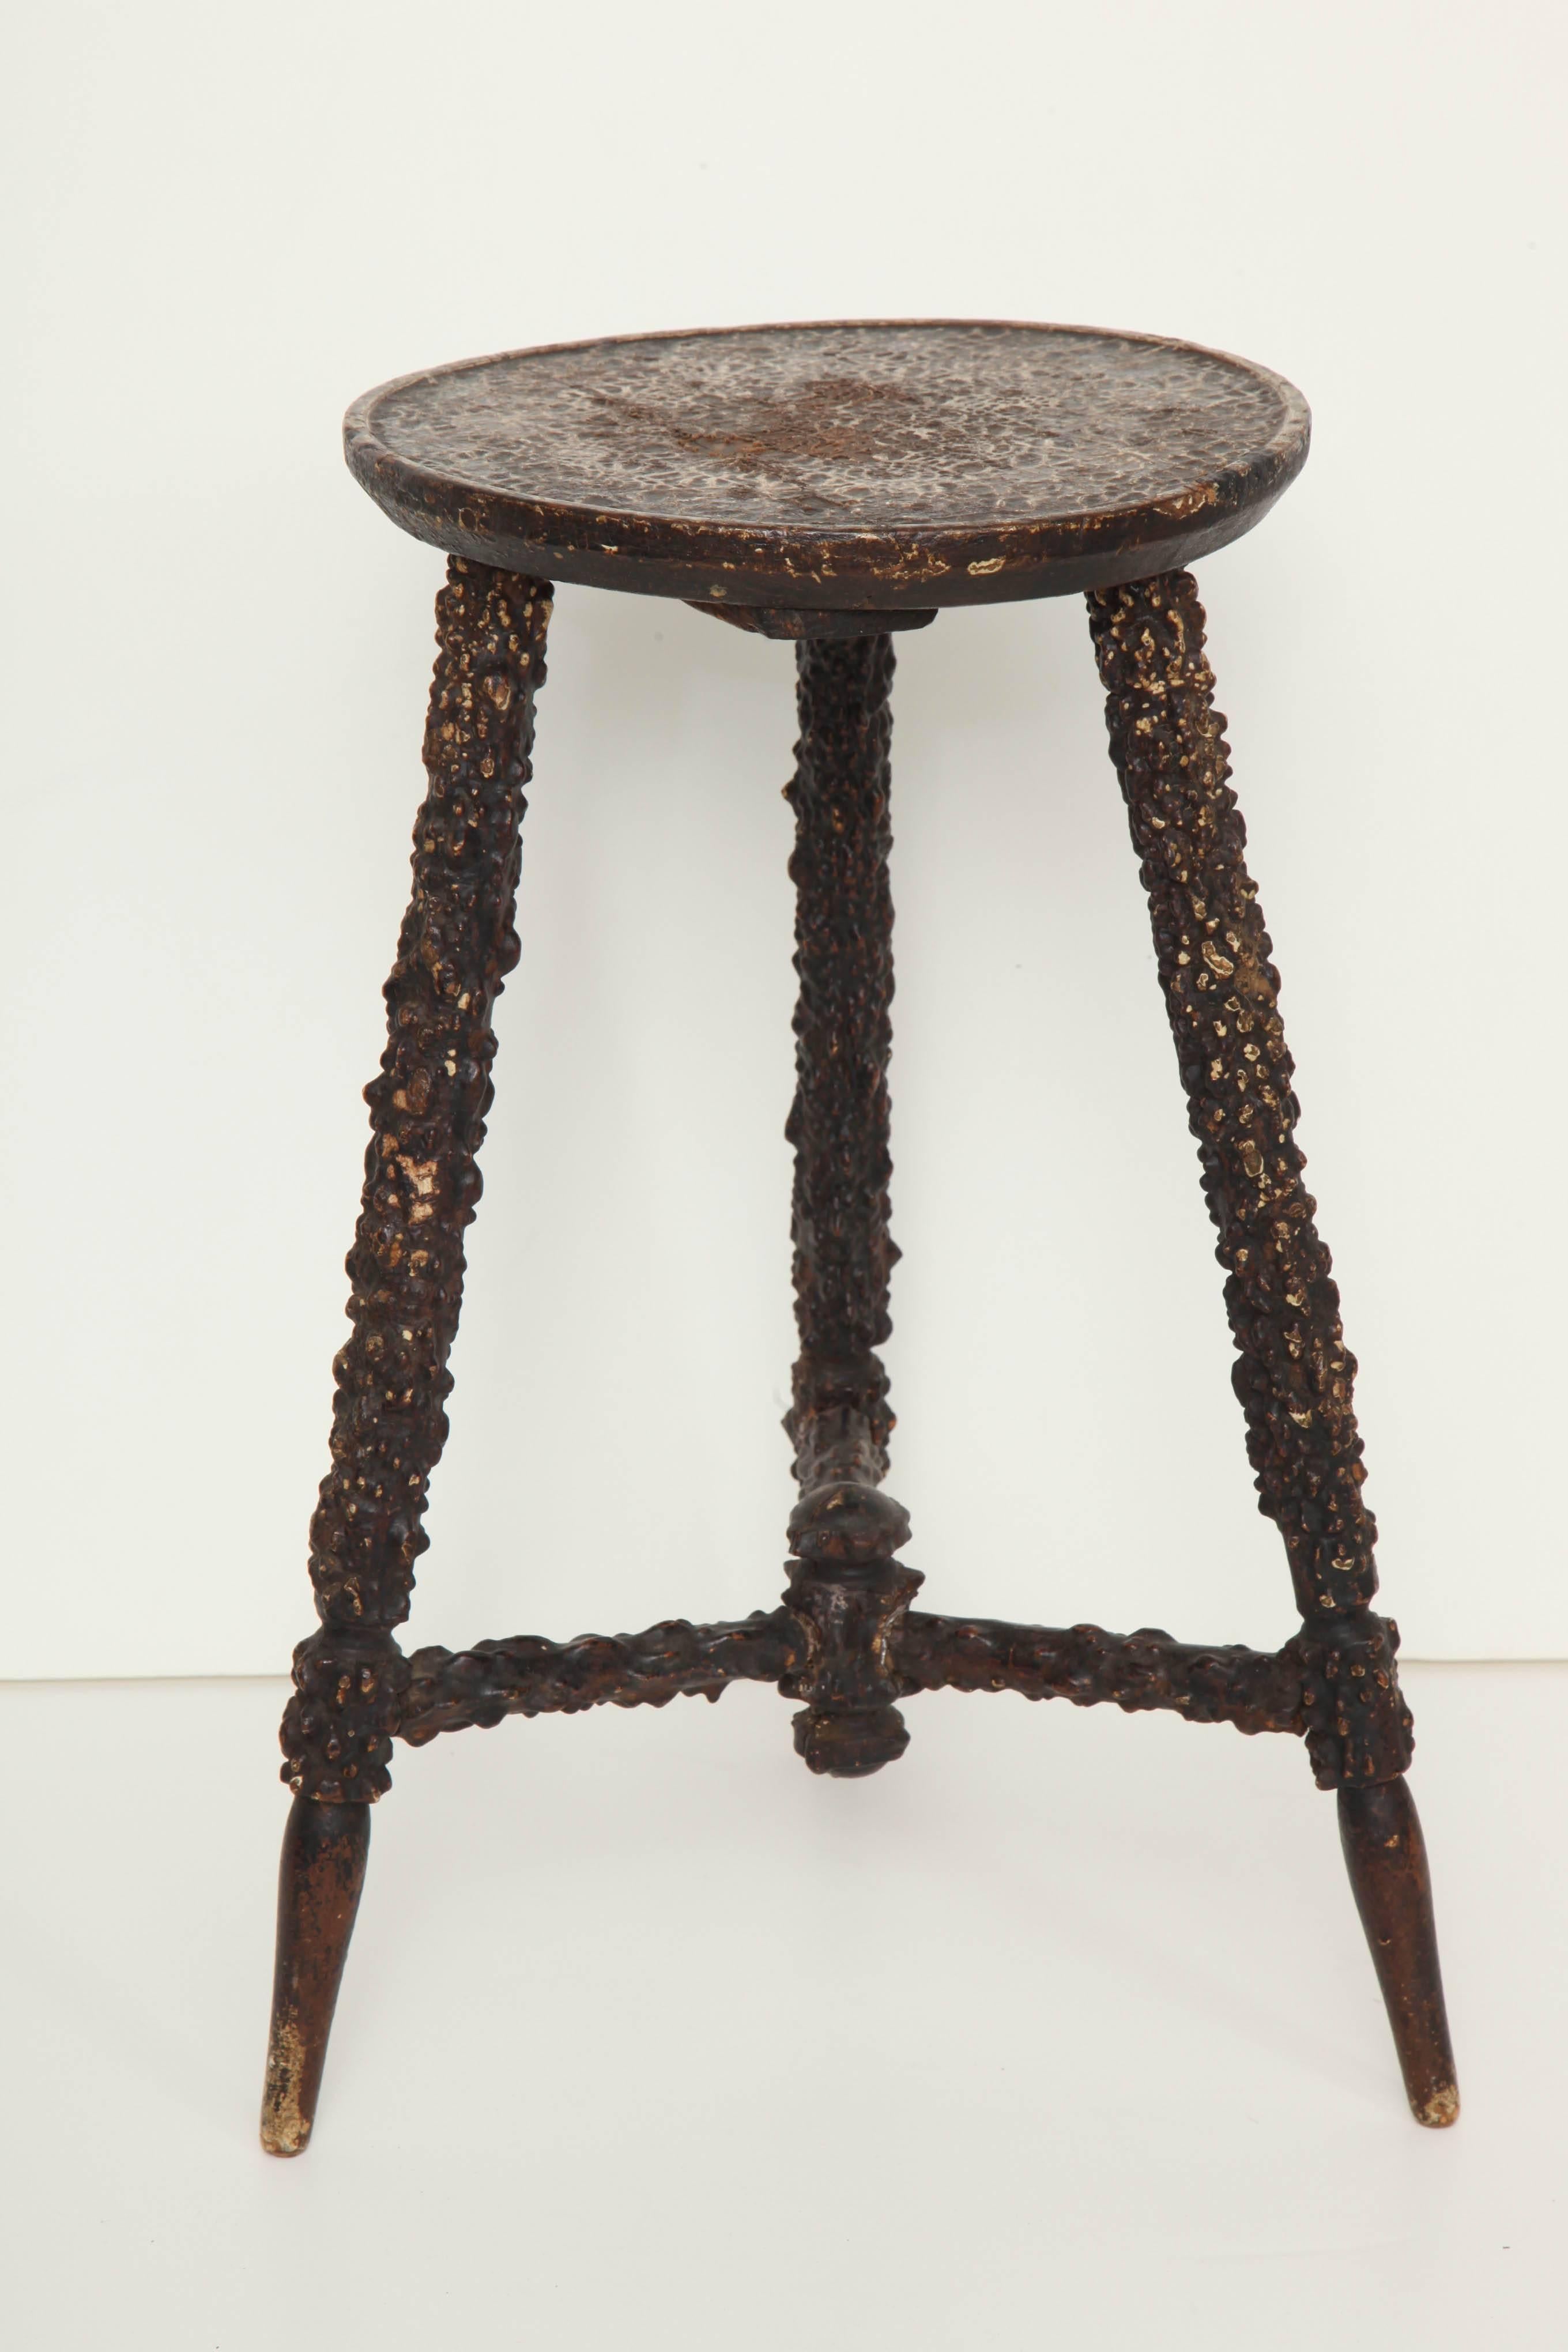 British A Late 19th Century English Rusticated Stool